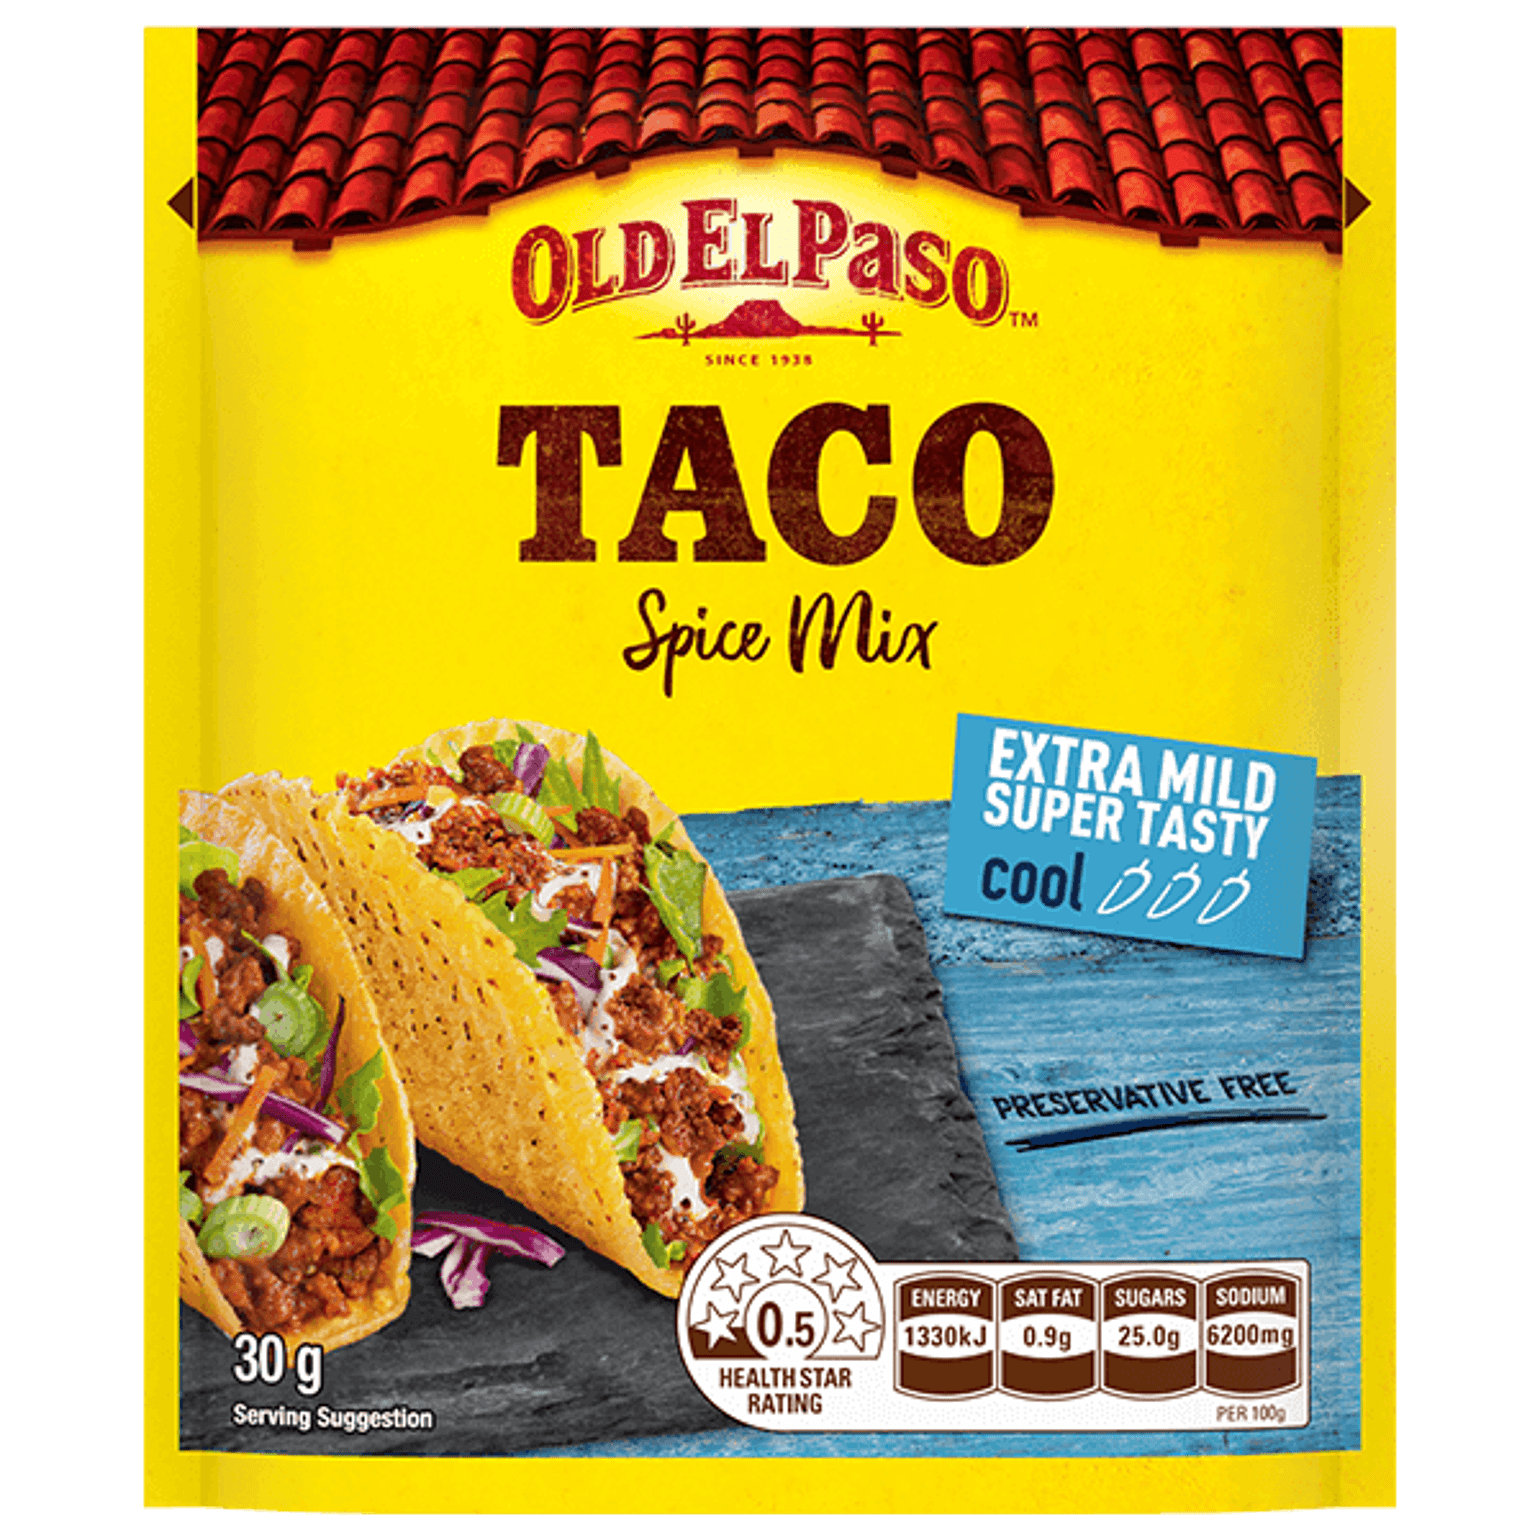 a pack of Old El Paso's extra mild super tasty cool taco spice mix (30g)